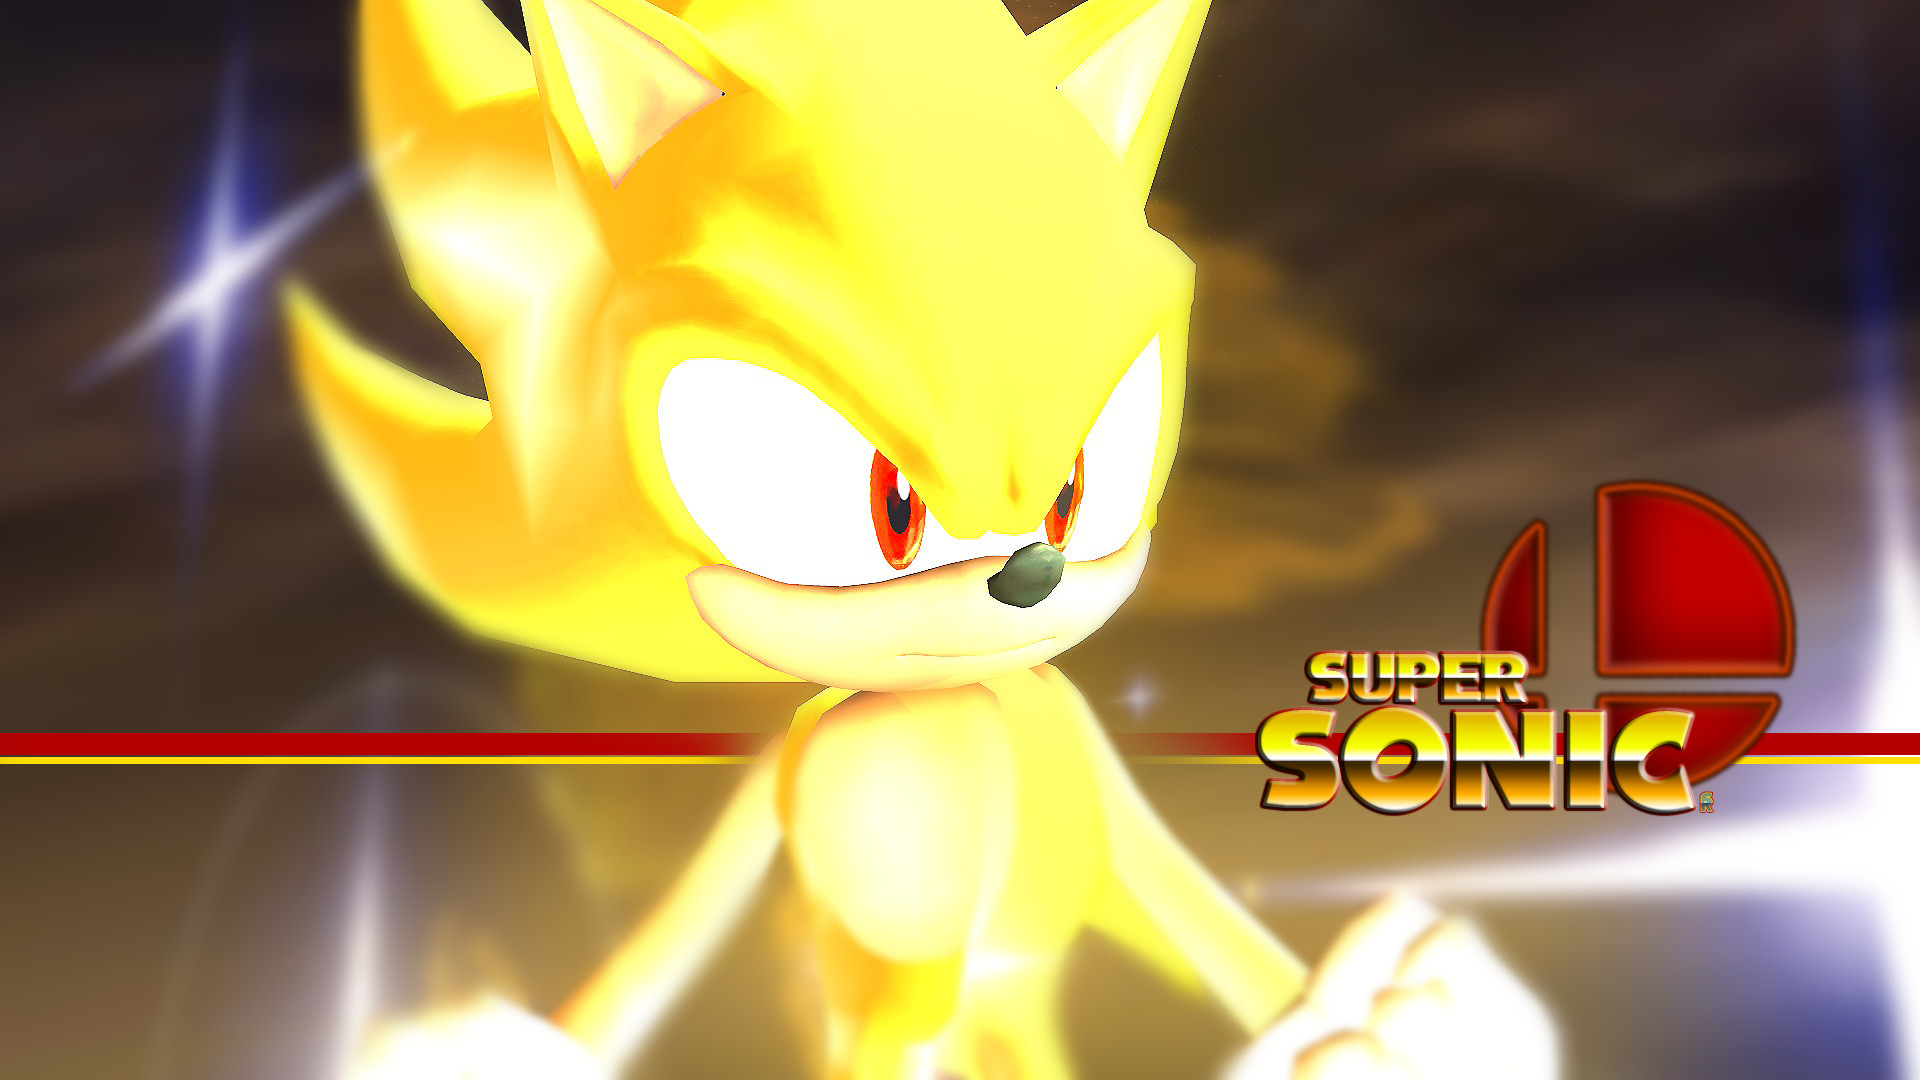 1920x1080 SSBB Supersonic Wallpaper by RealSonicSpeed SSBB Supersonic Wallpaper by  RealSonicSpeed